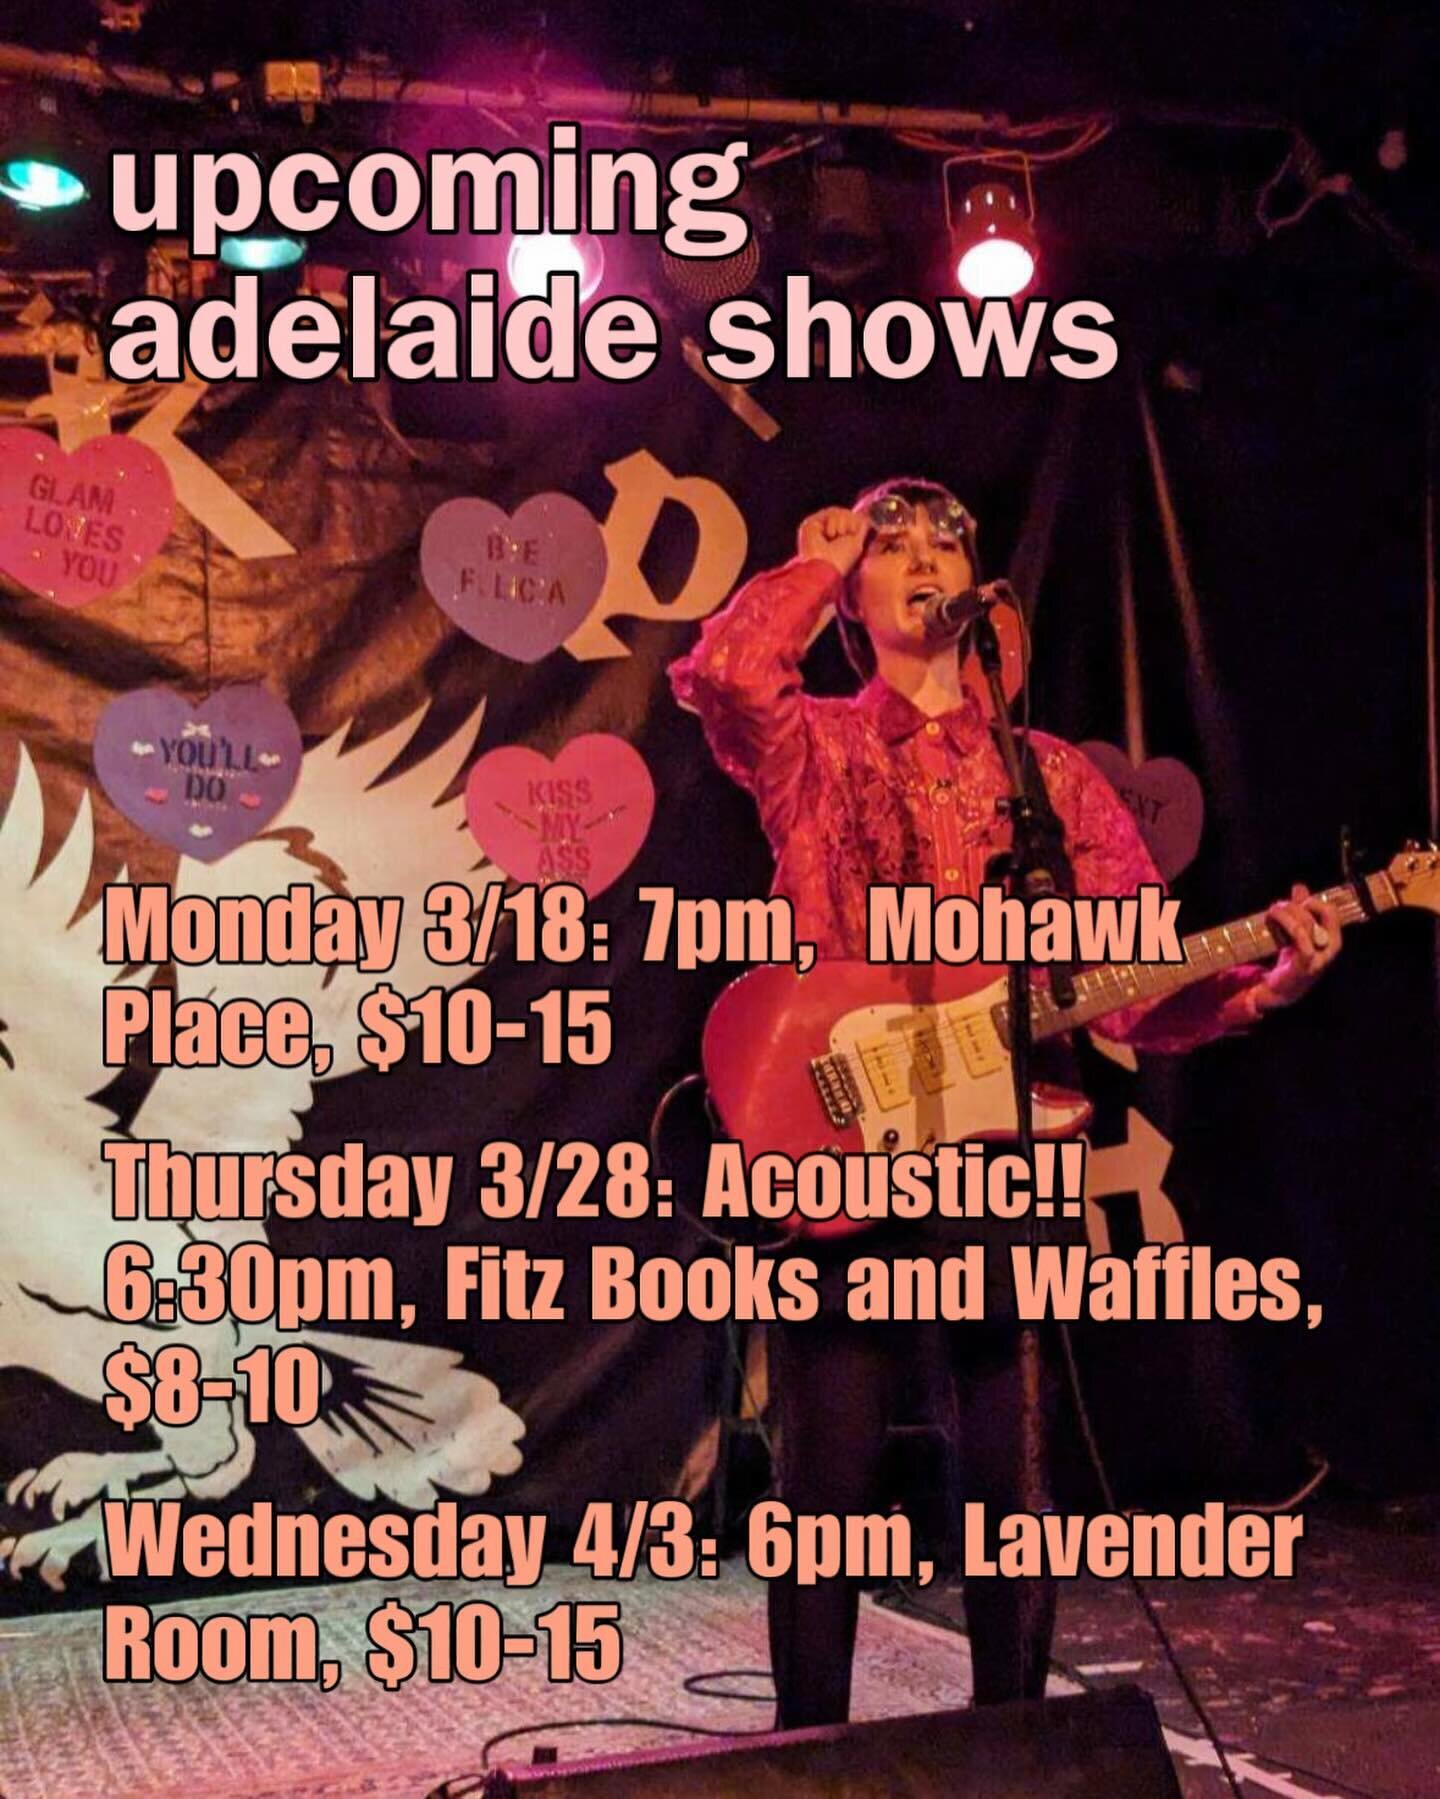 COME ON OUT BBS!!! i have some early evening shows coming up this early spring 🥰🥰🥰 come hang with me as the sun stays out longer ❤️&zwj;🔥💋 see you soon!!